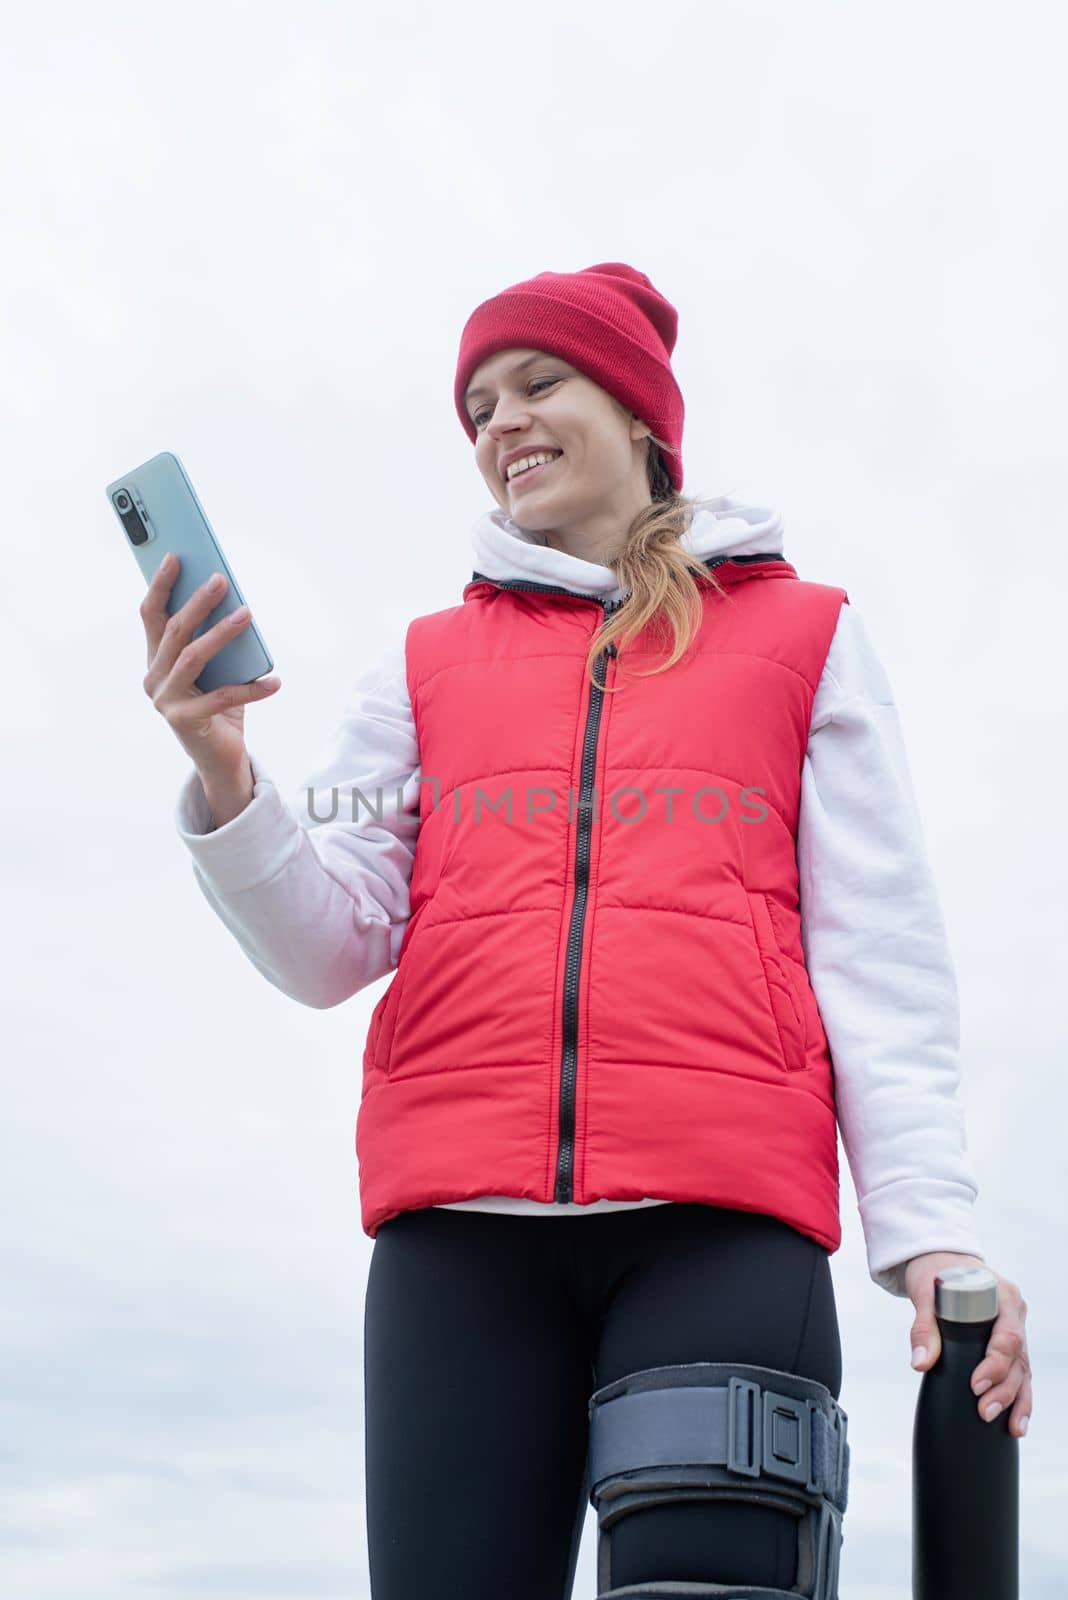 Woman wearing sport clothes and knee brace or orthosis after leg surgery walking in the park using smartphone. Medical and healthcare concept.